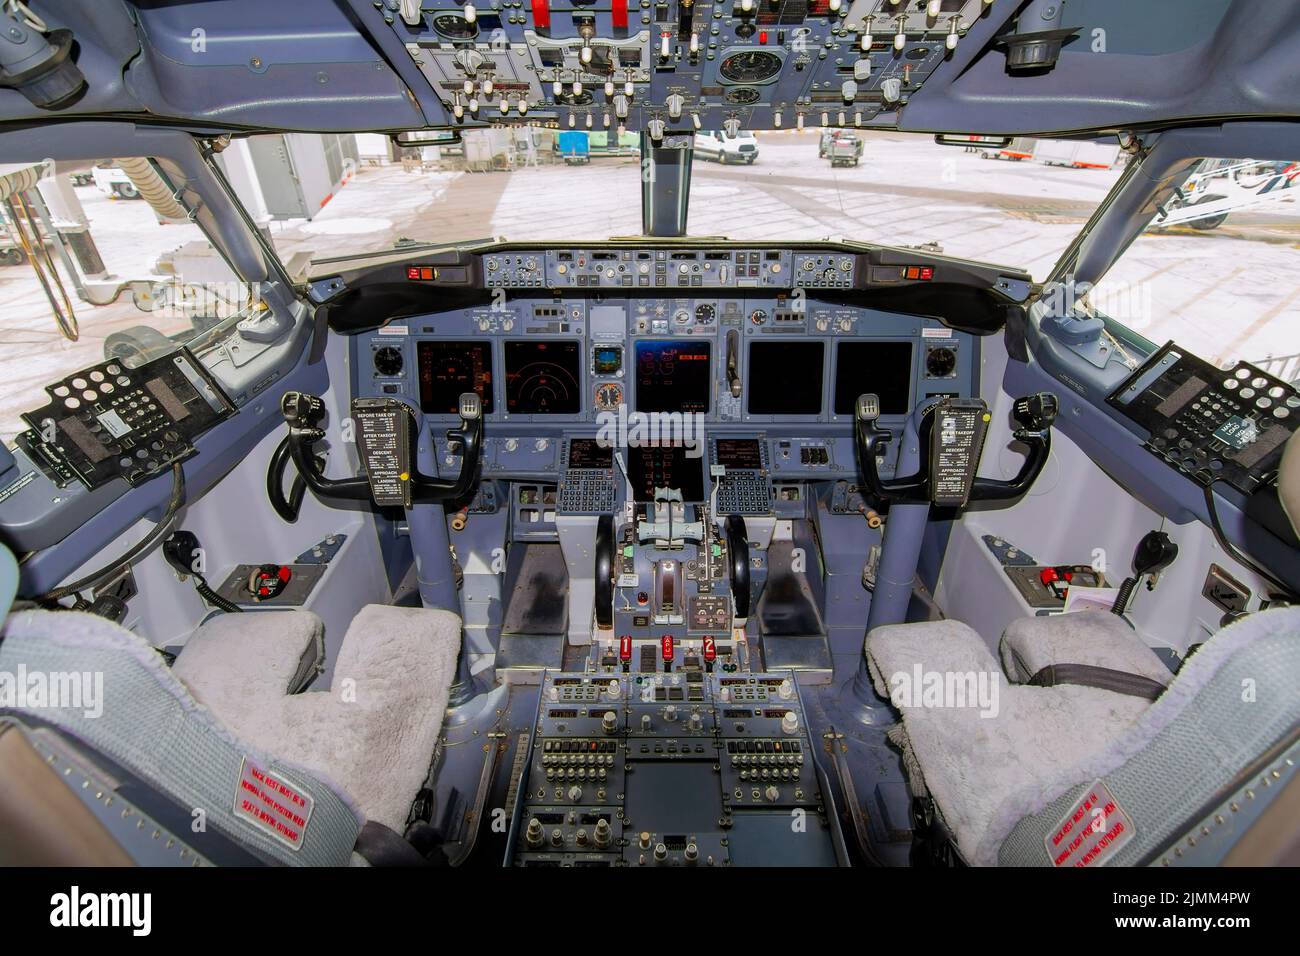 A view of the cockpit of a large commercial airplane a cockpit . Cockpit view of a commercial aircraft cruising Control panel in a plane cockpit. Stock Photo